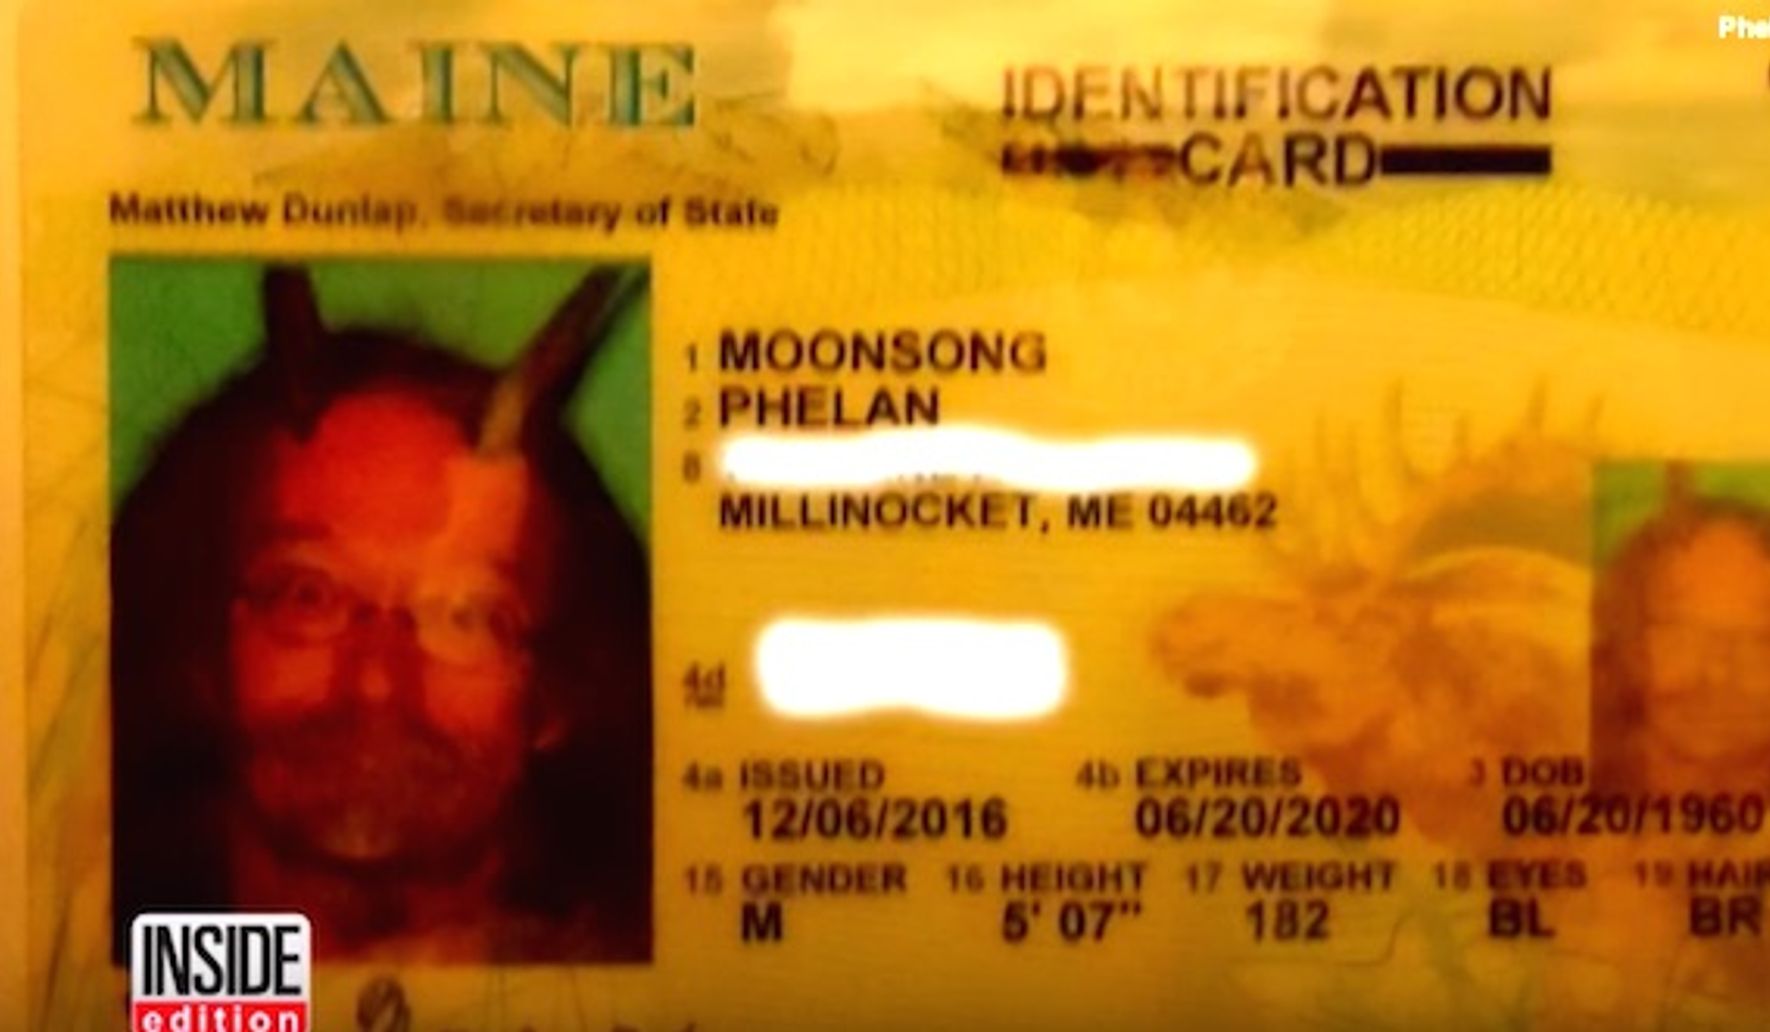 Phelan MoonSong, pagan priest, allowed to wear horns in Maine state ID